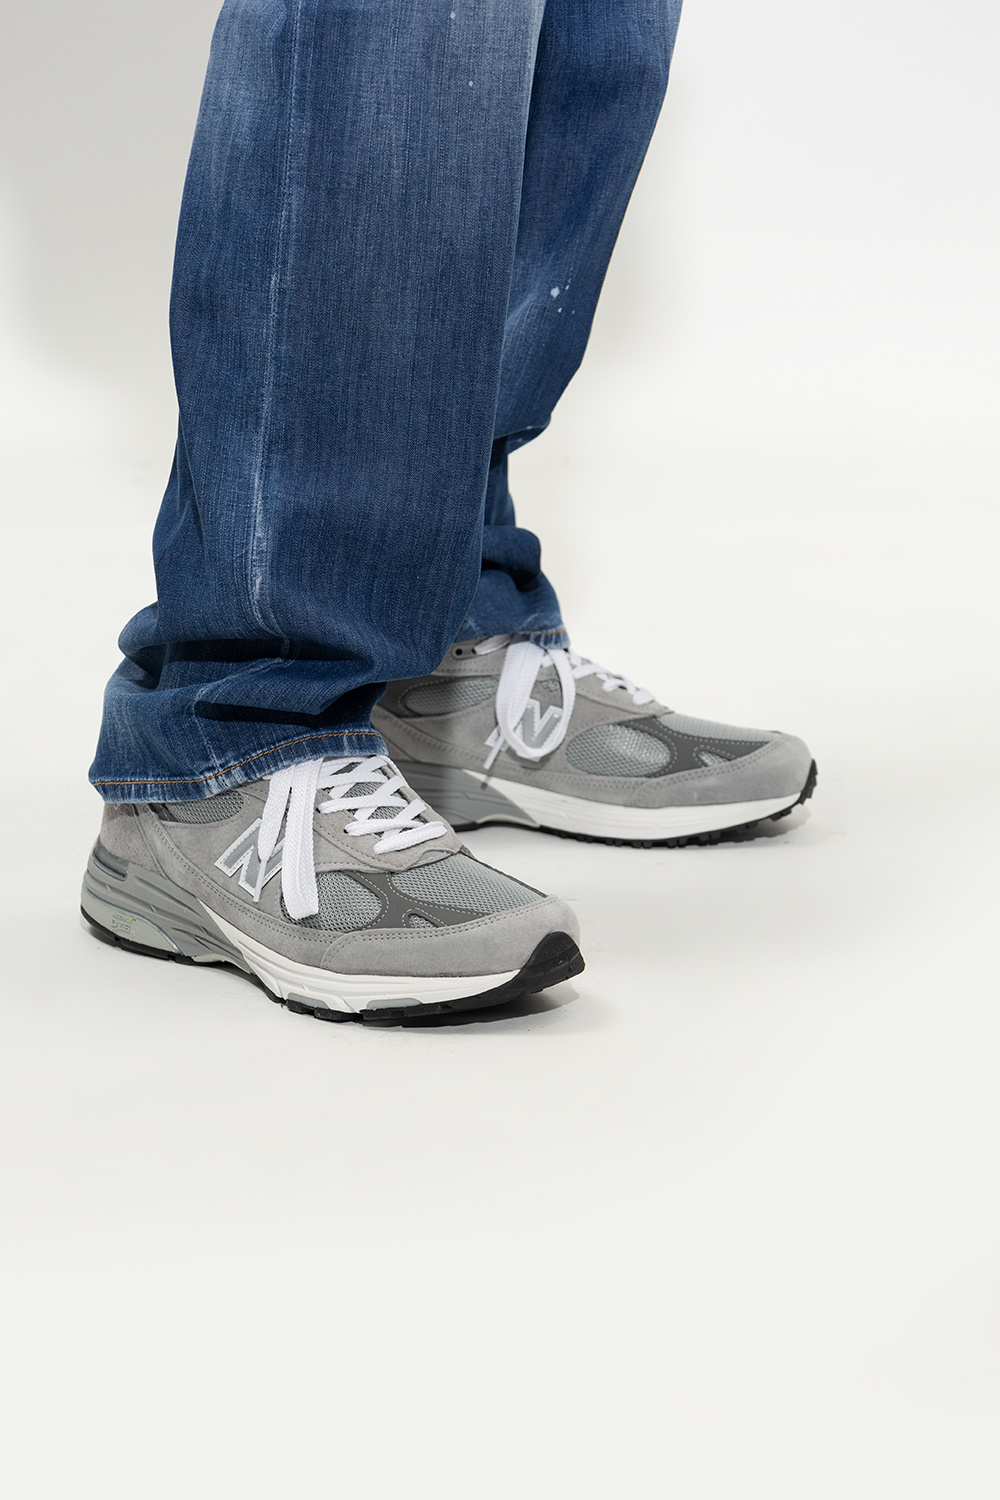 New Balance 'MR993GL' sneakers from 'Made in UK' series | Men's